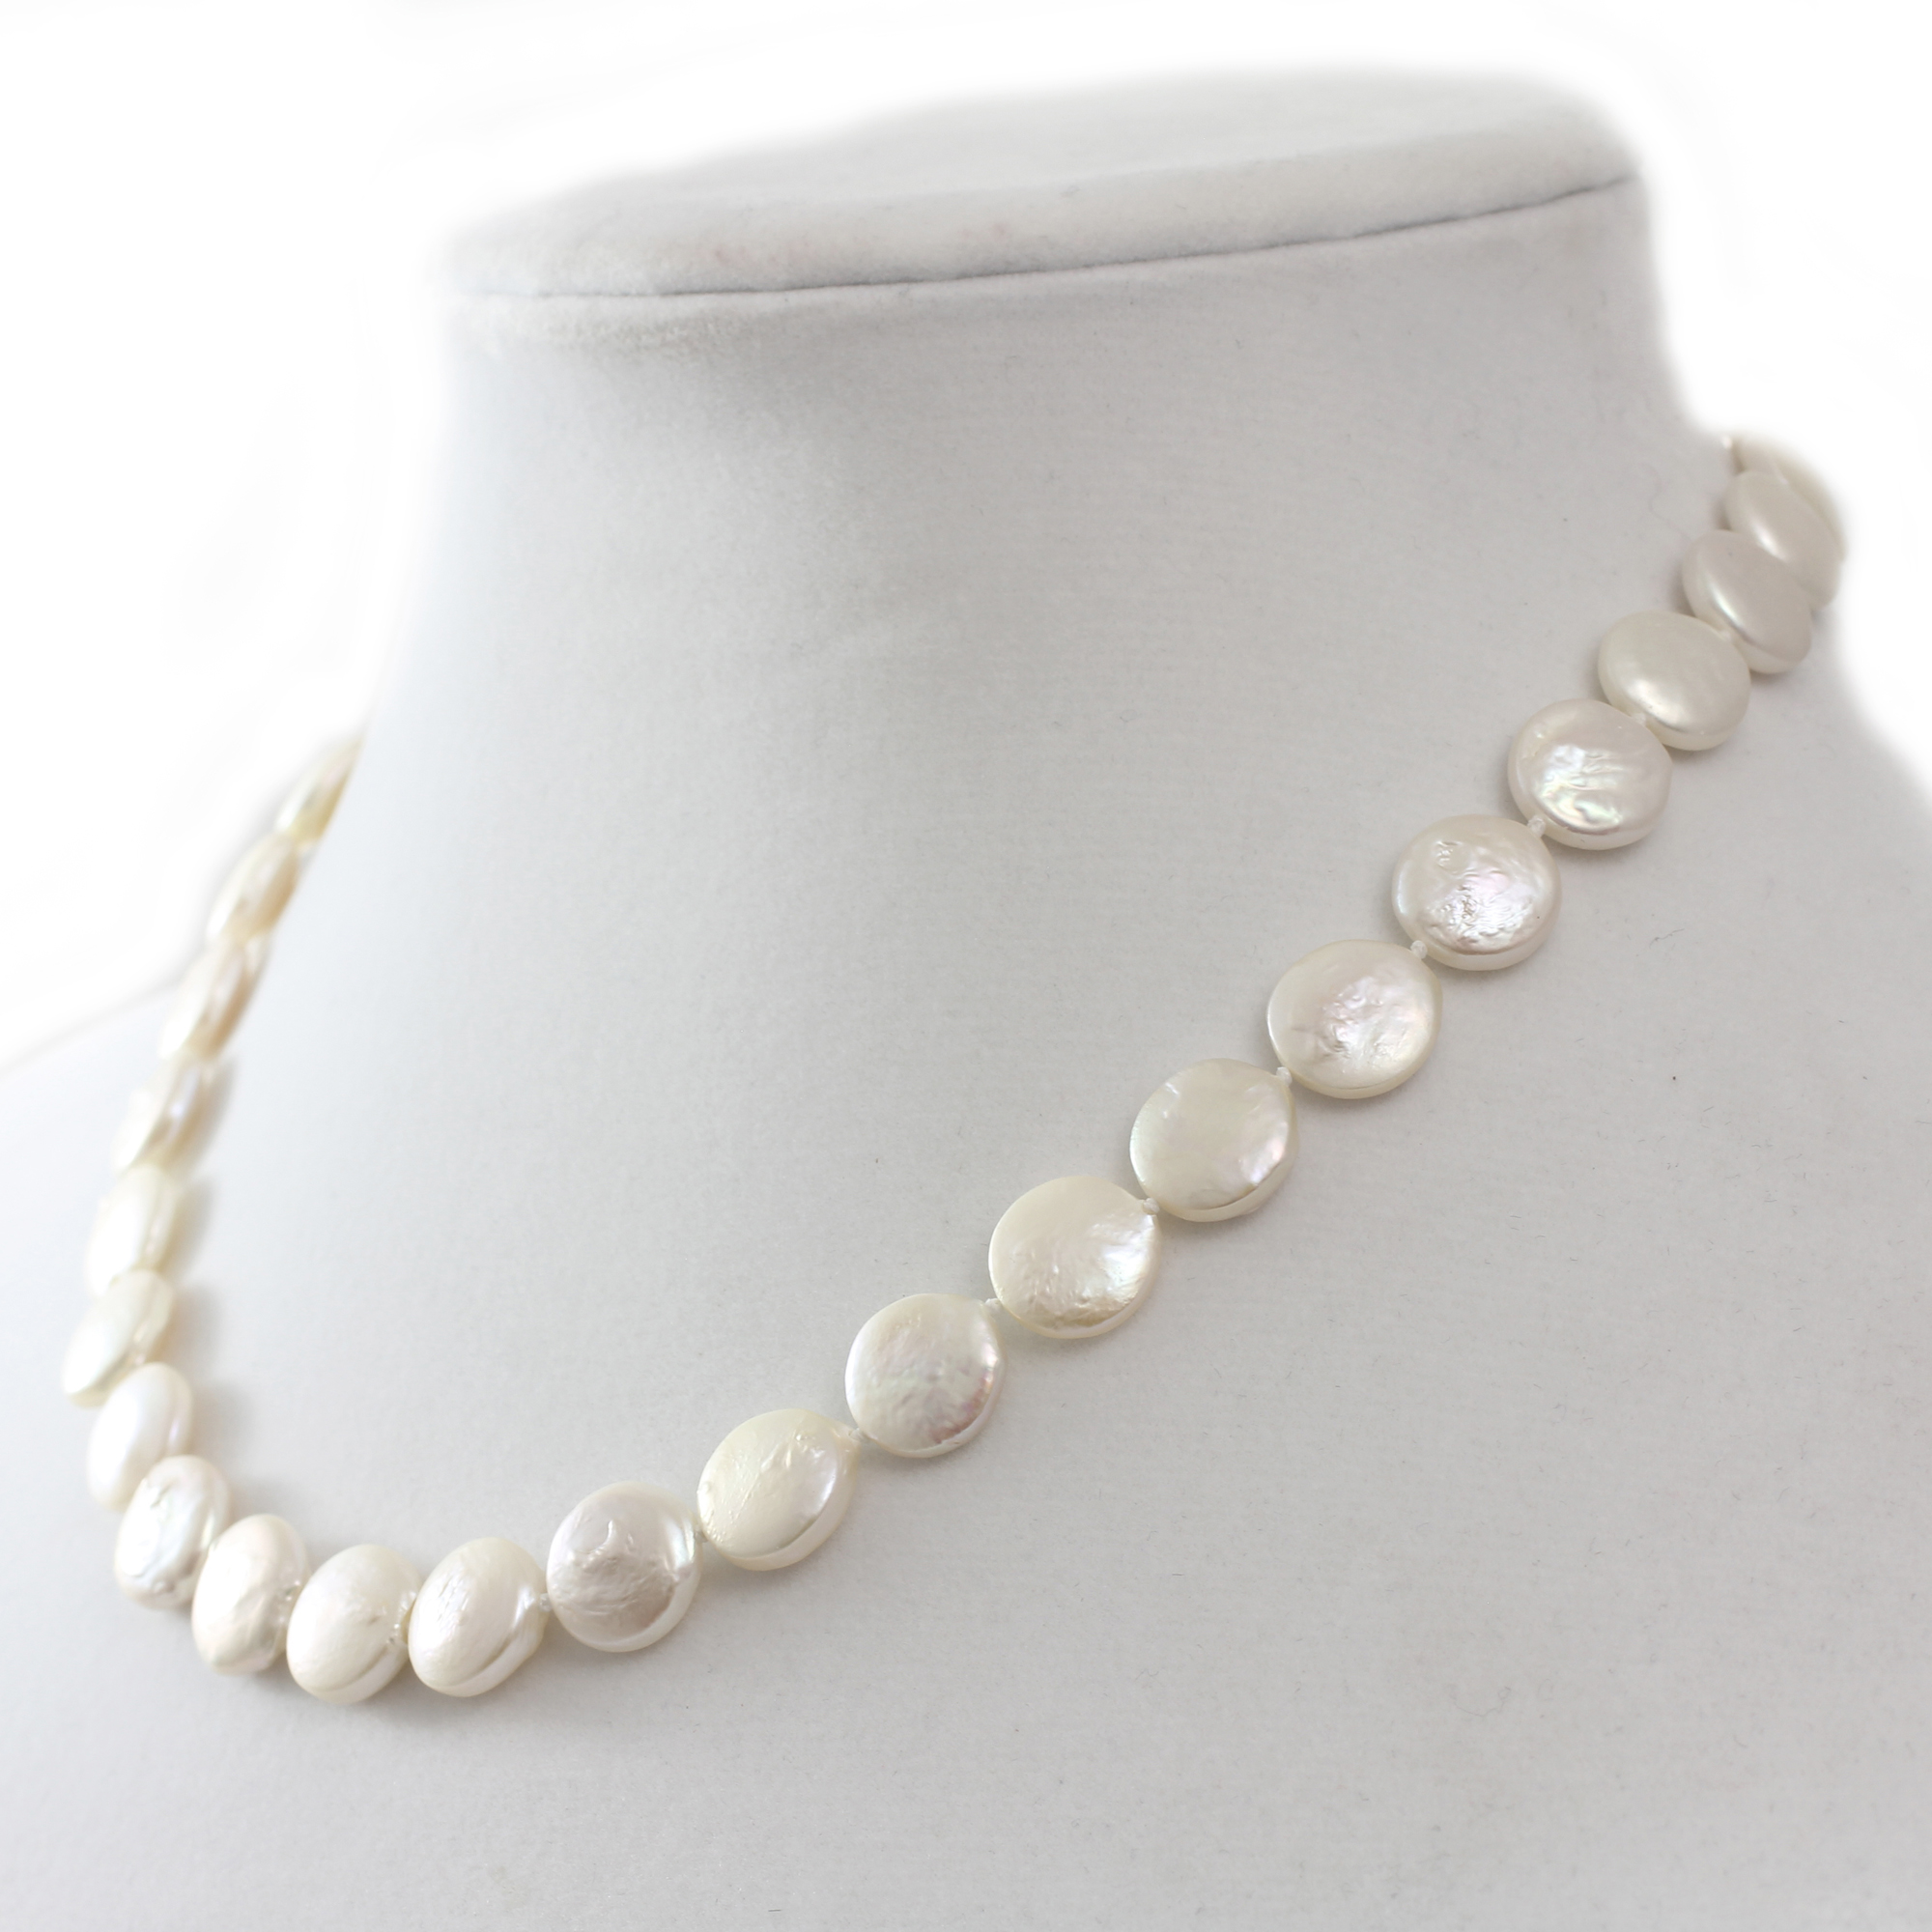 Orien Jewelry Exquisite Baroque Pearl Necklace - 13mmX13mm Coin Shape White Freshwater Pearl Necklace 17 Inch